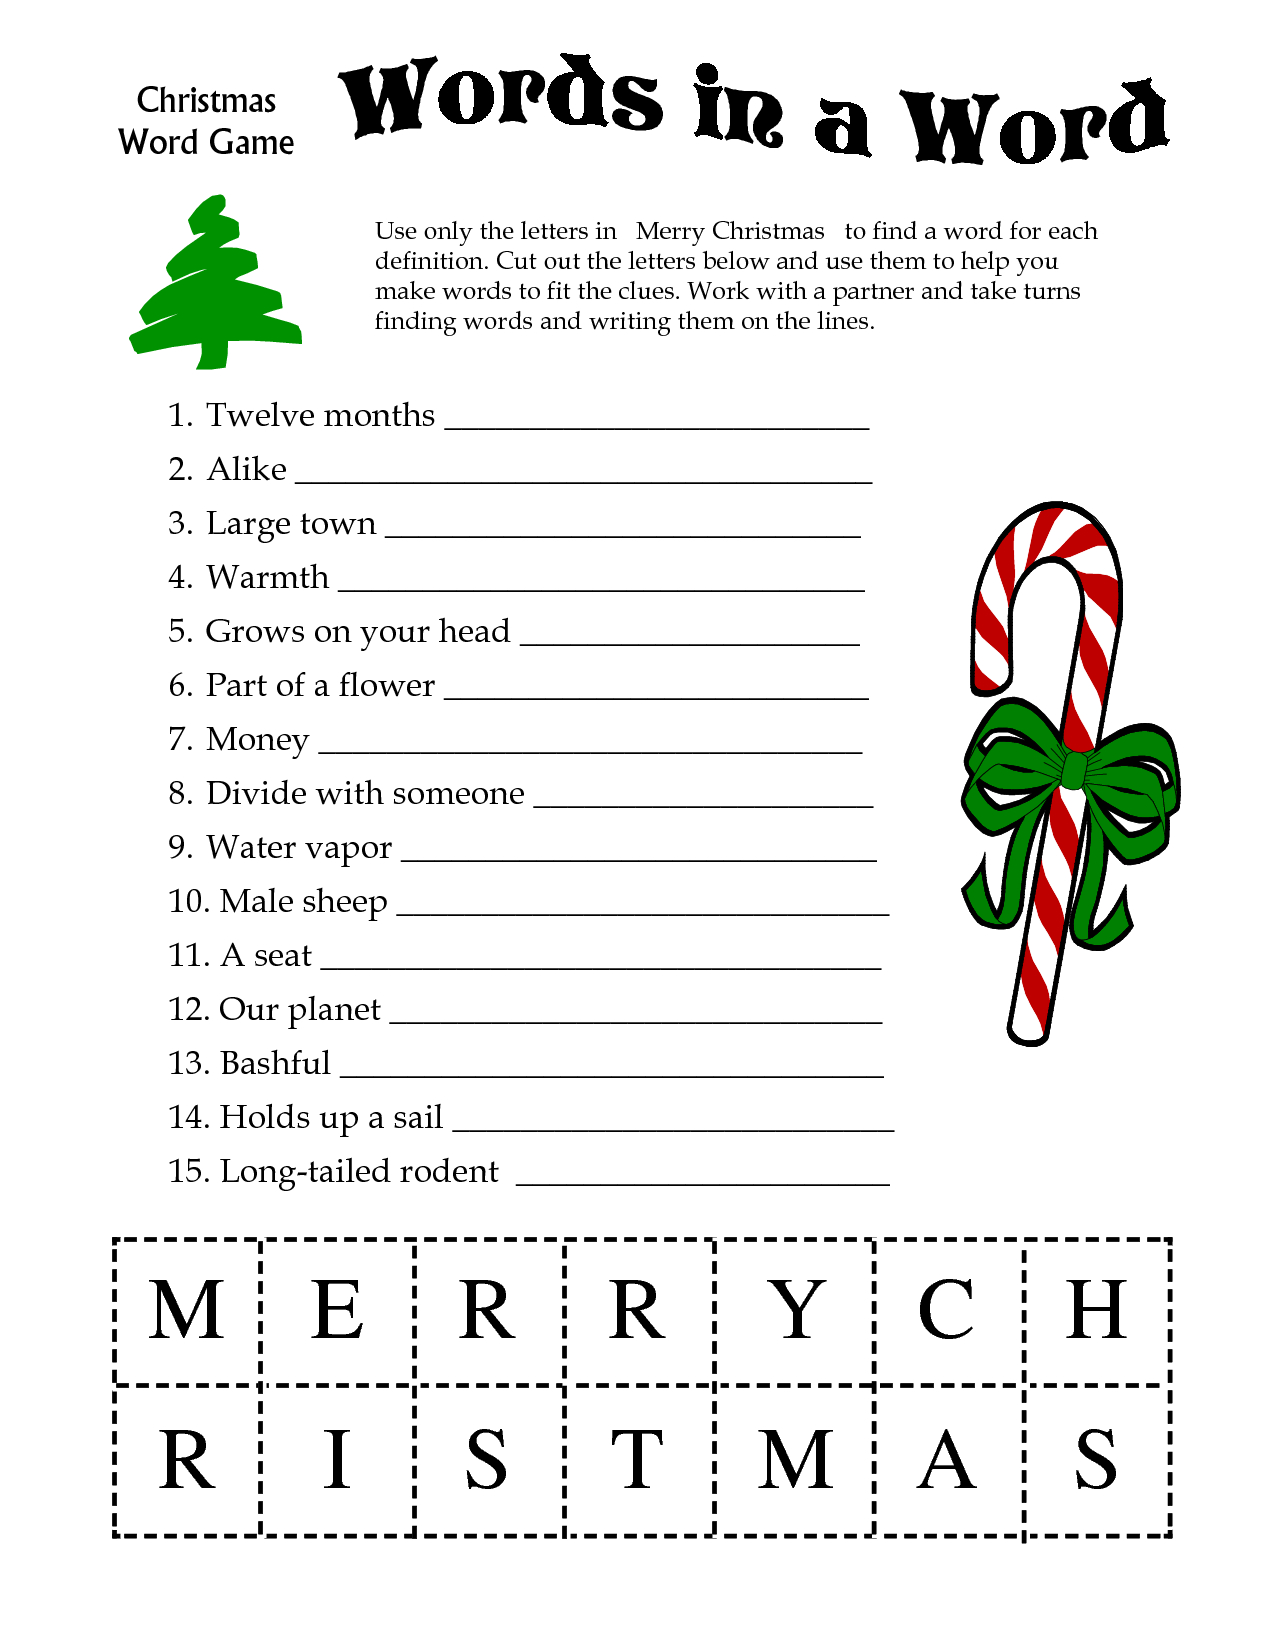 5 Images Of Free Printable Christmas Word Games | Printablee - Free Printable Christmas Word Games For Adults